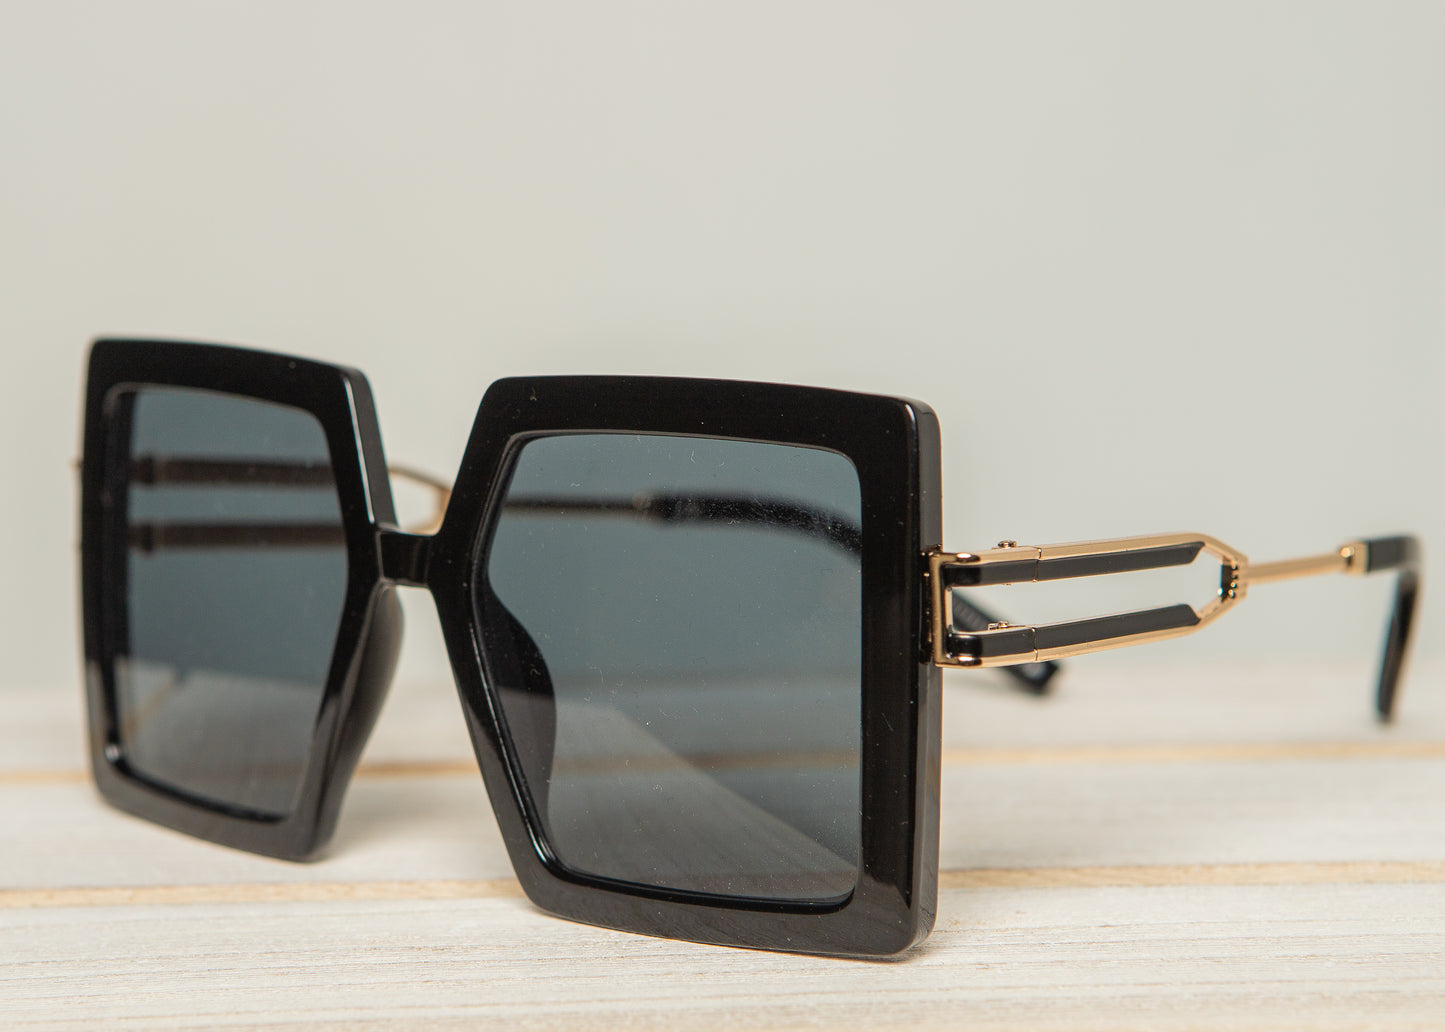 "Unbothered" Oversize Square Shades